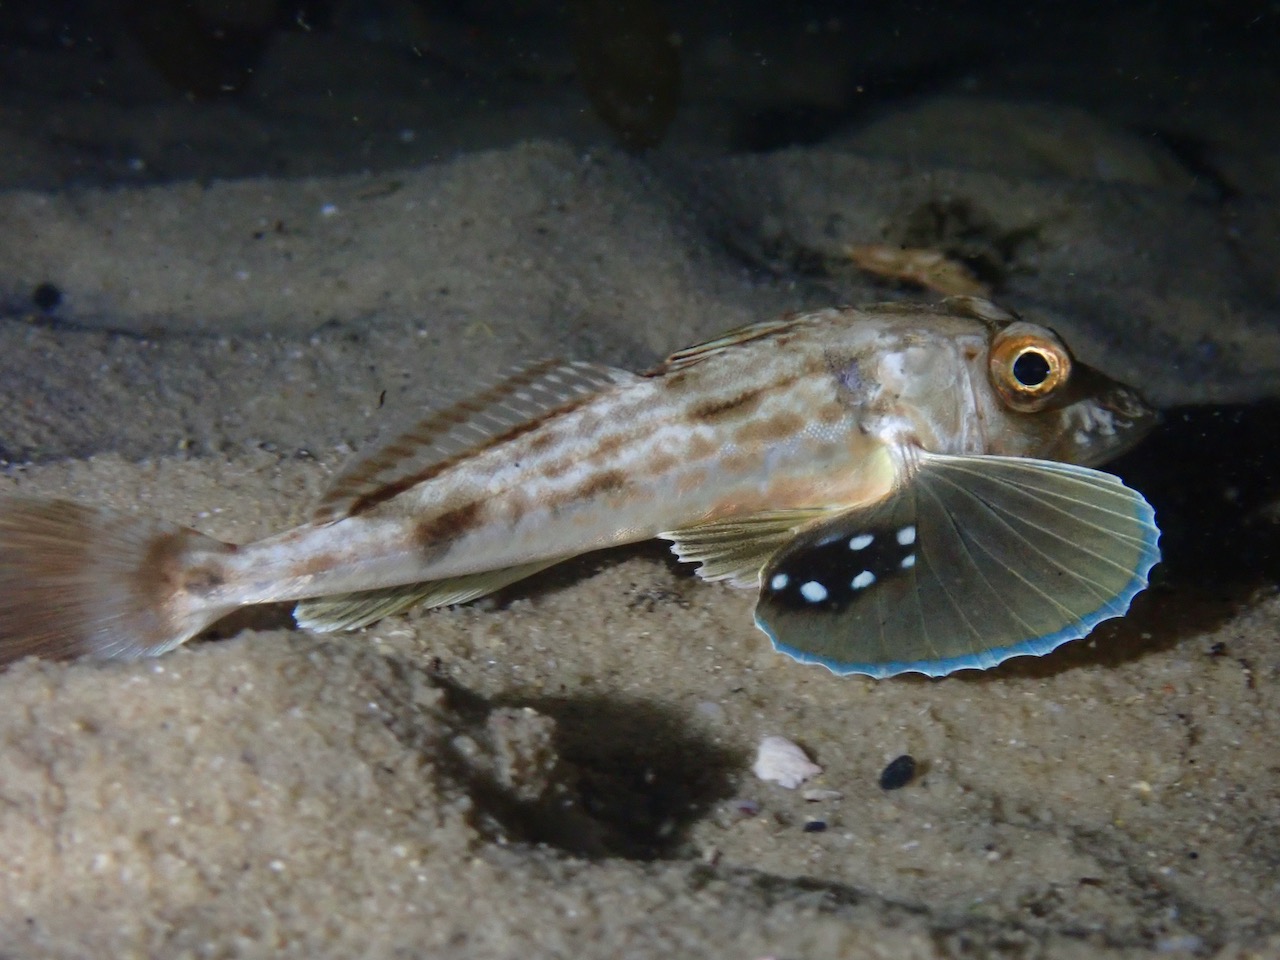 A flying gunard poses for the camera with its wings out; spotted by a scuba diver in Cape Town while night diving